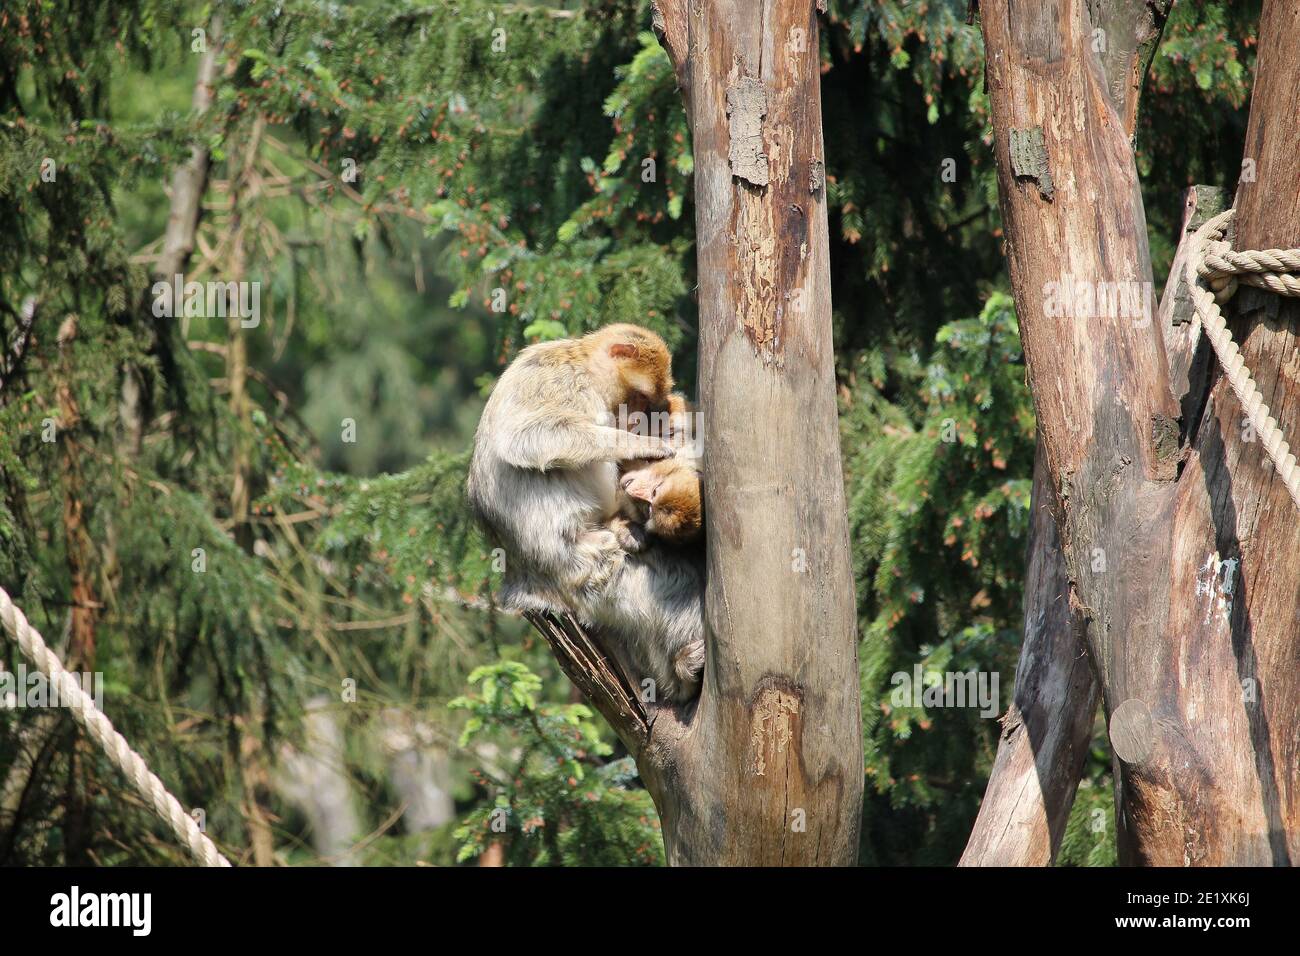 Squirrel monkeys are lively little creatures that like to romp in the trees and also sometimes cheekily steal things from people. Stock Photo